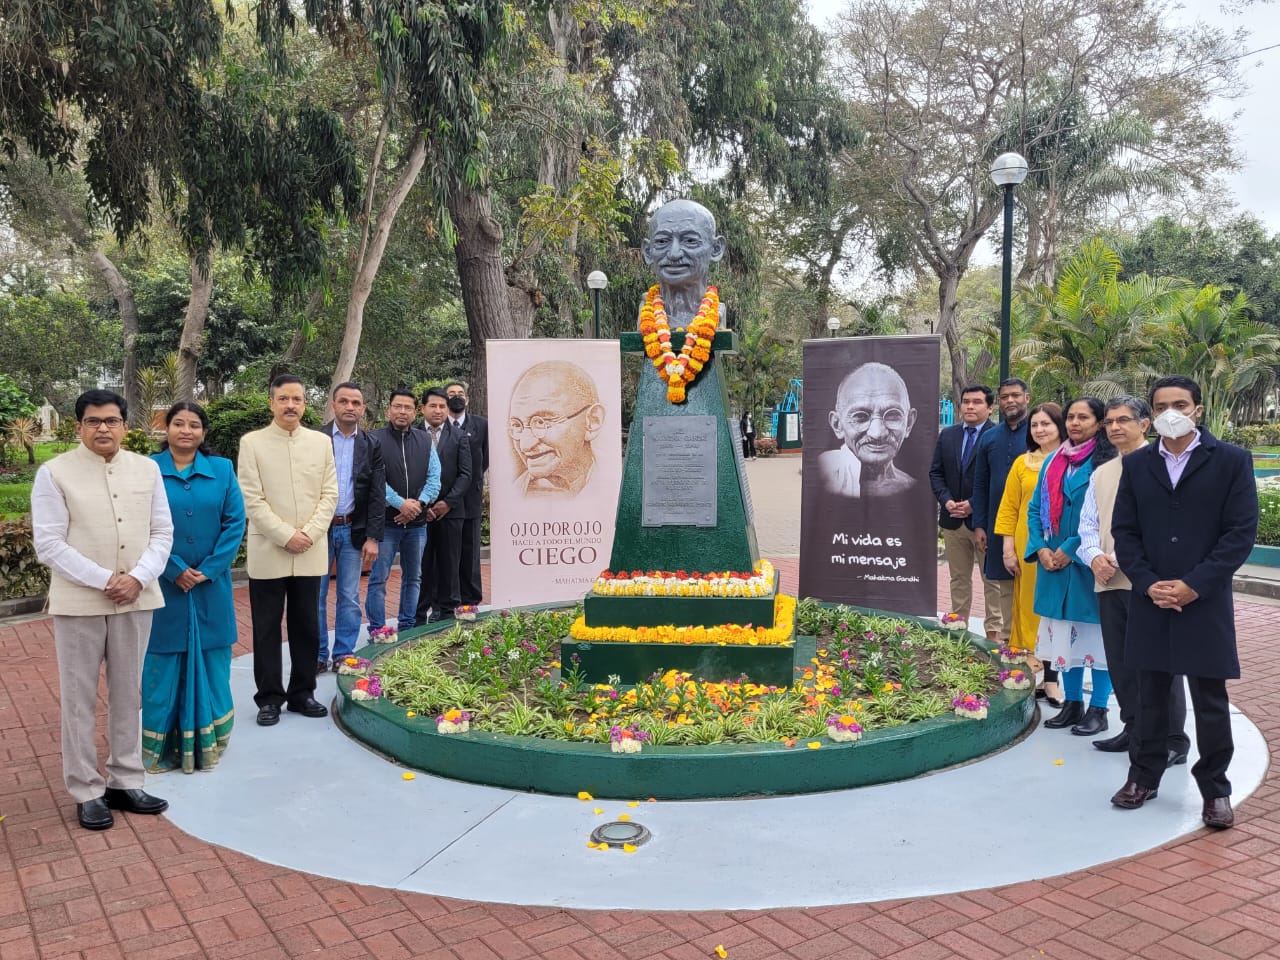 Floral tributes paid to Mahatma Gandhi on the occasion of #GandhiJayanti2022 at Mariscal Castilla Park, Lima. Father of Nation's universal ideals of truth, peace, compassion and non-violance continue to reveal the right course of action. 